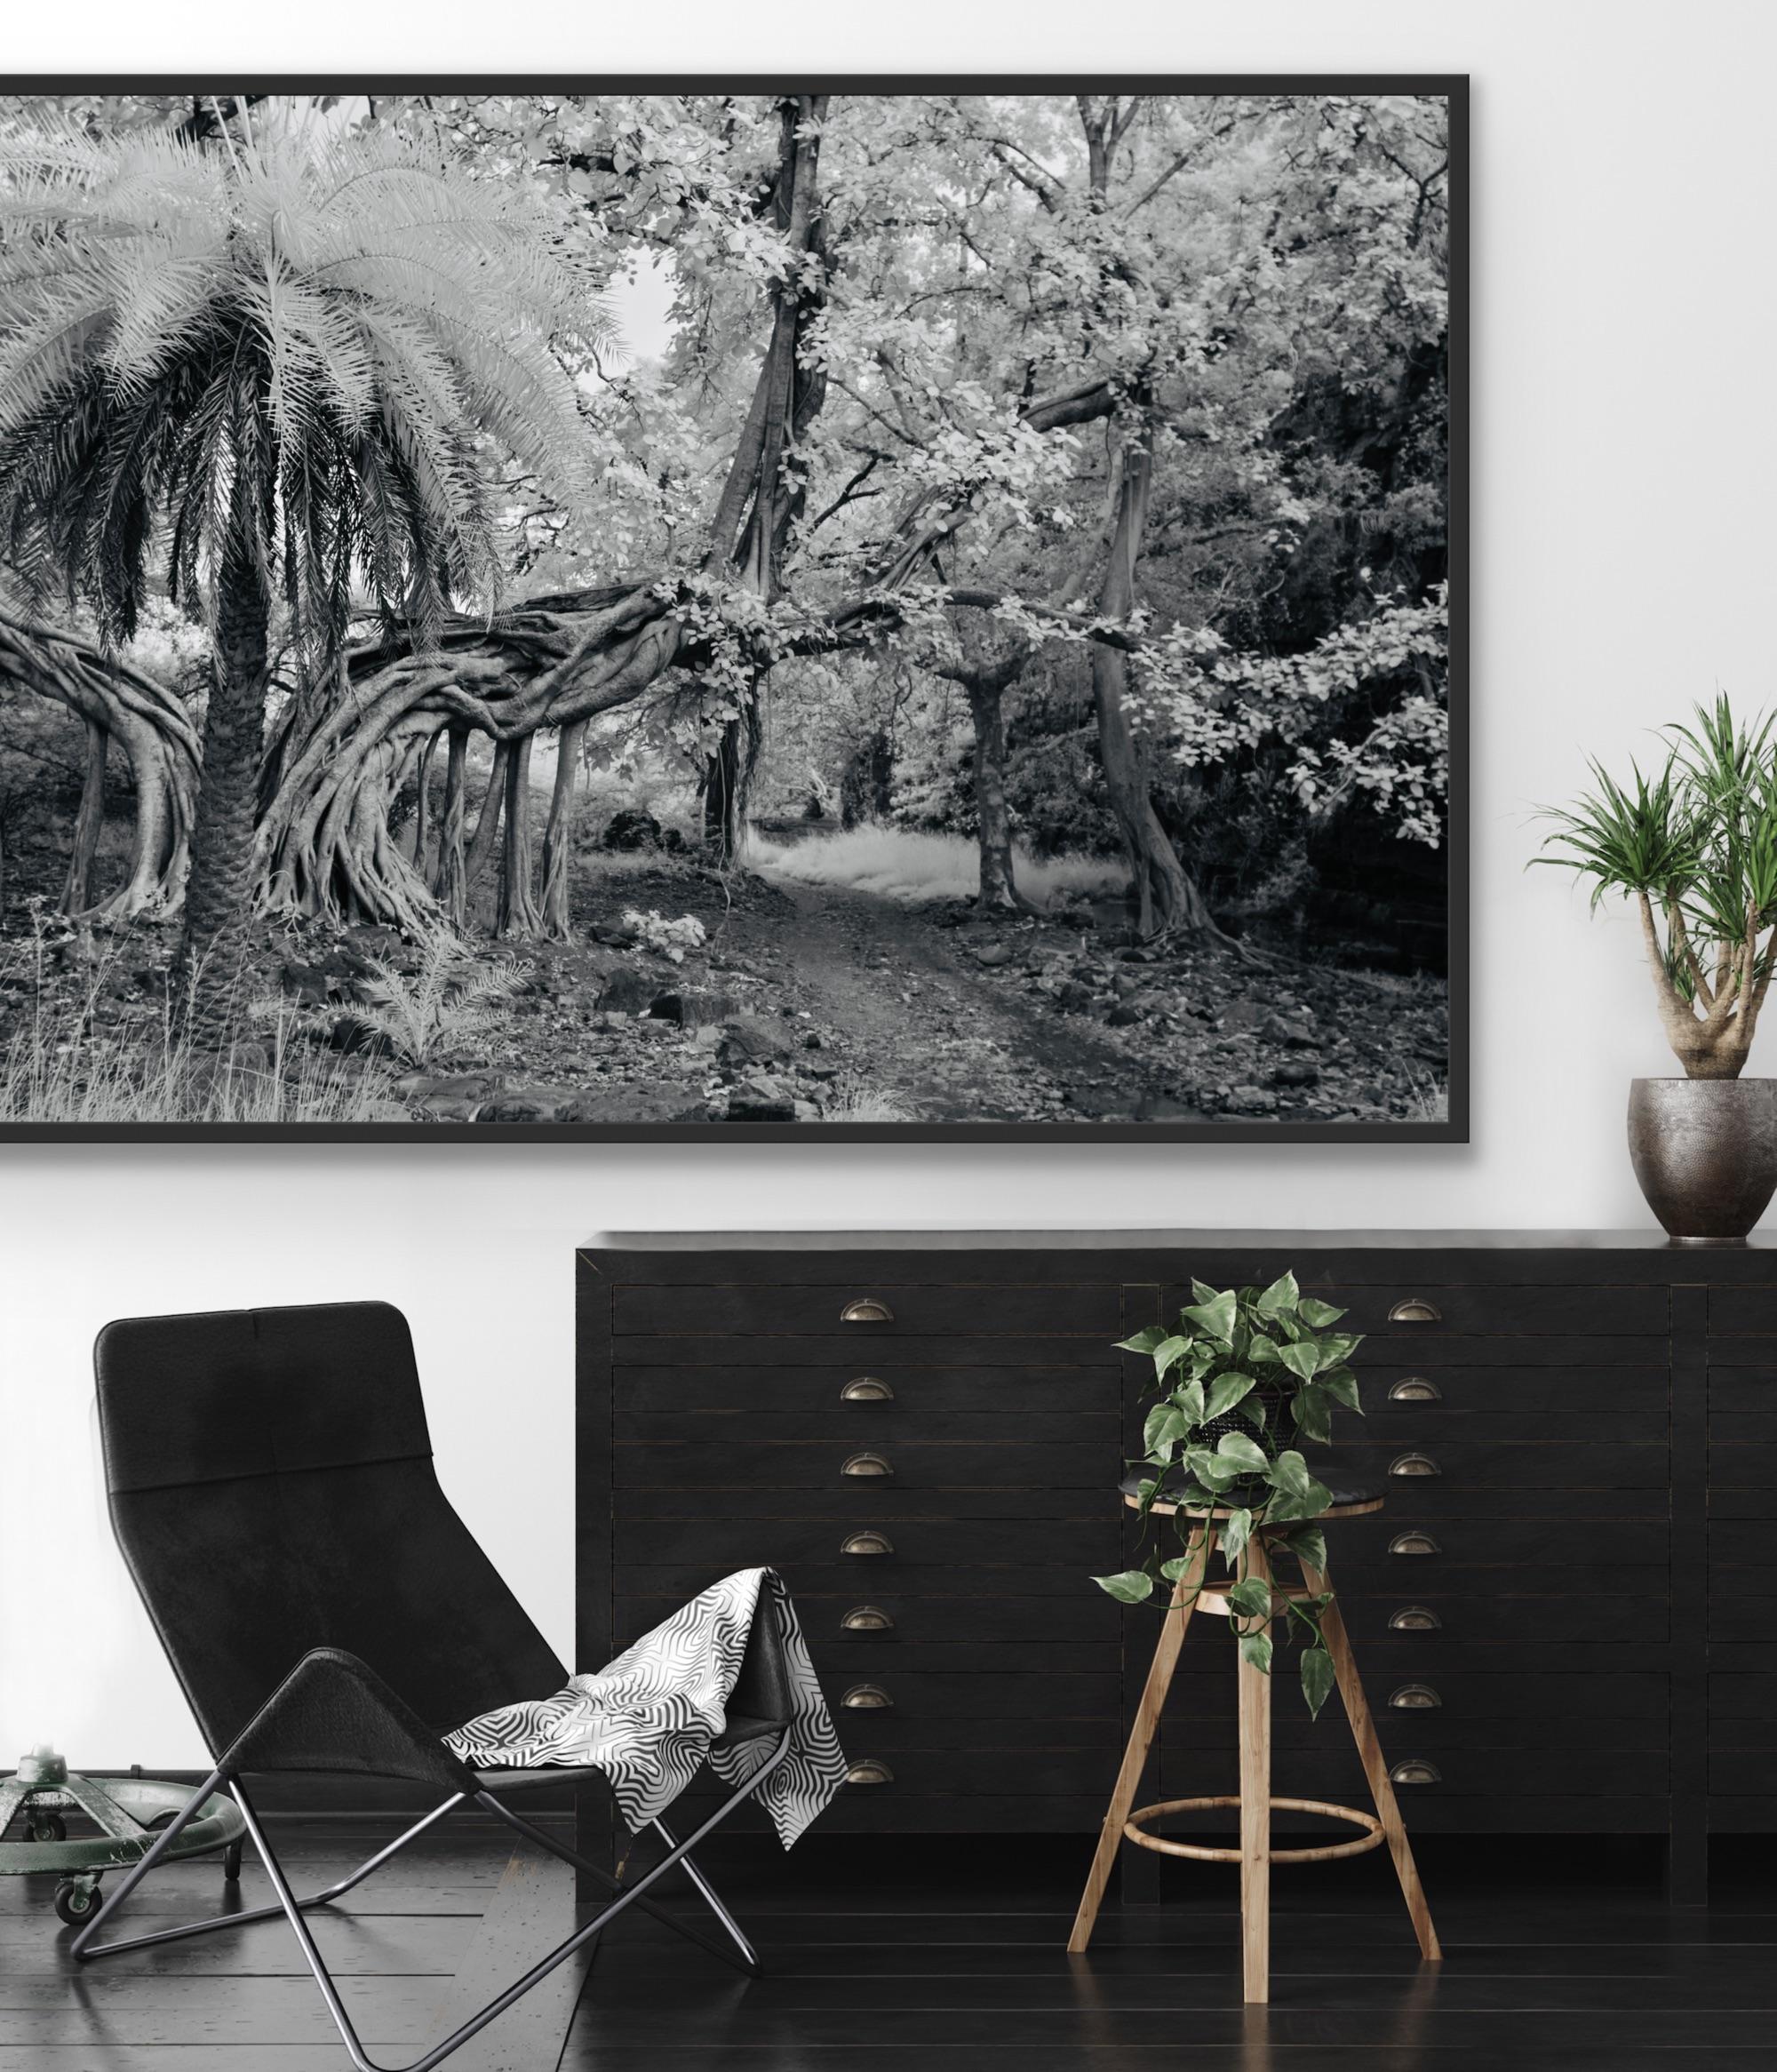 Landscape Photography Jungle Forest Black White Palm Tree India Wildlife Banyan  For Sale 4